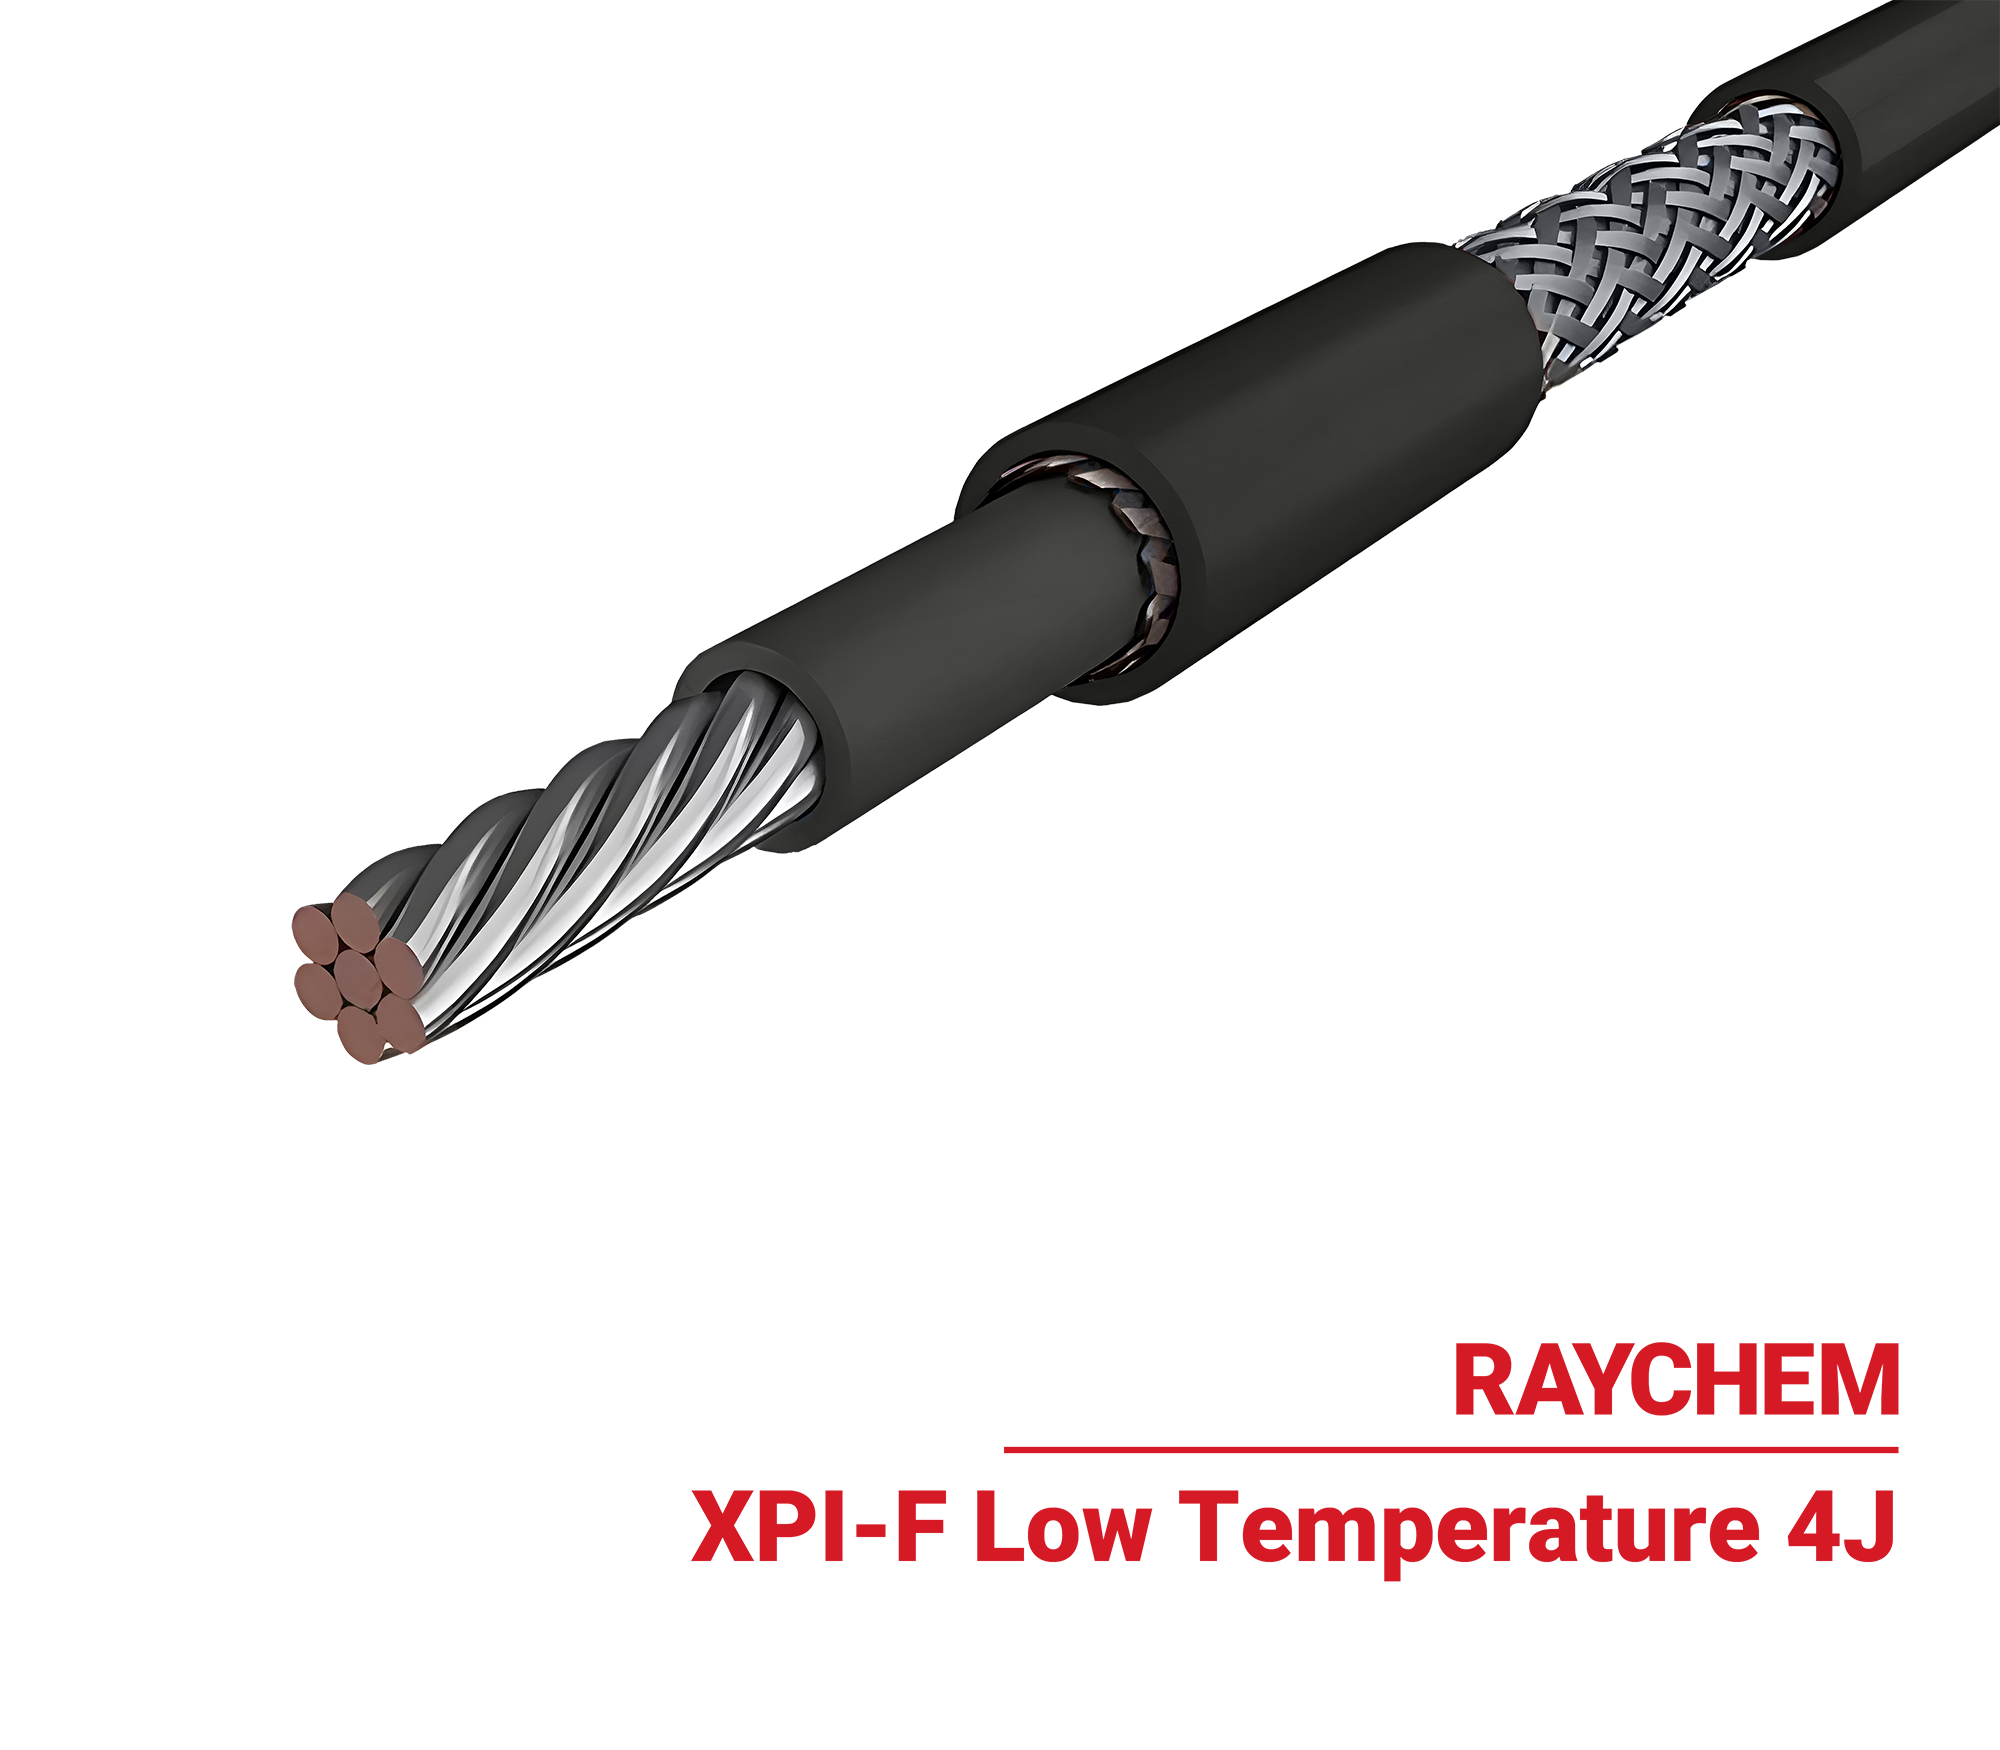 XPI-F-Low-Temperature-4J-Industrial-Heating-Cable-nVent-Raychem